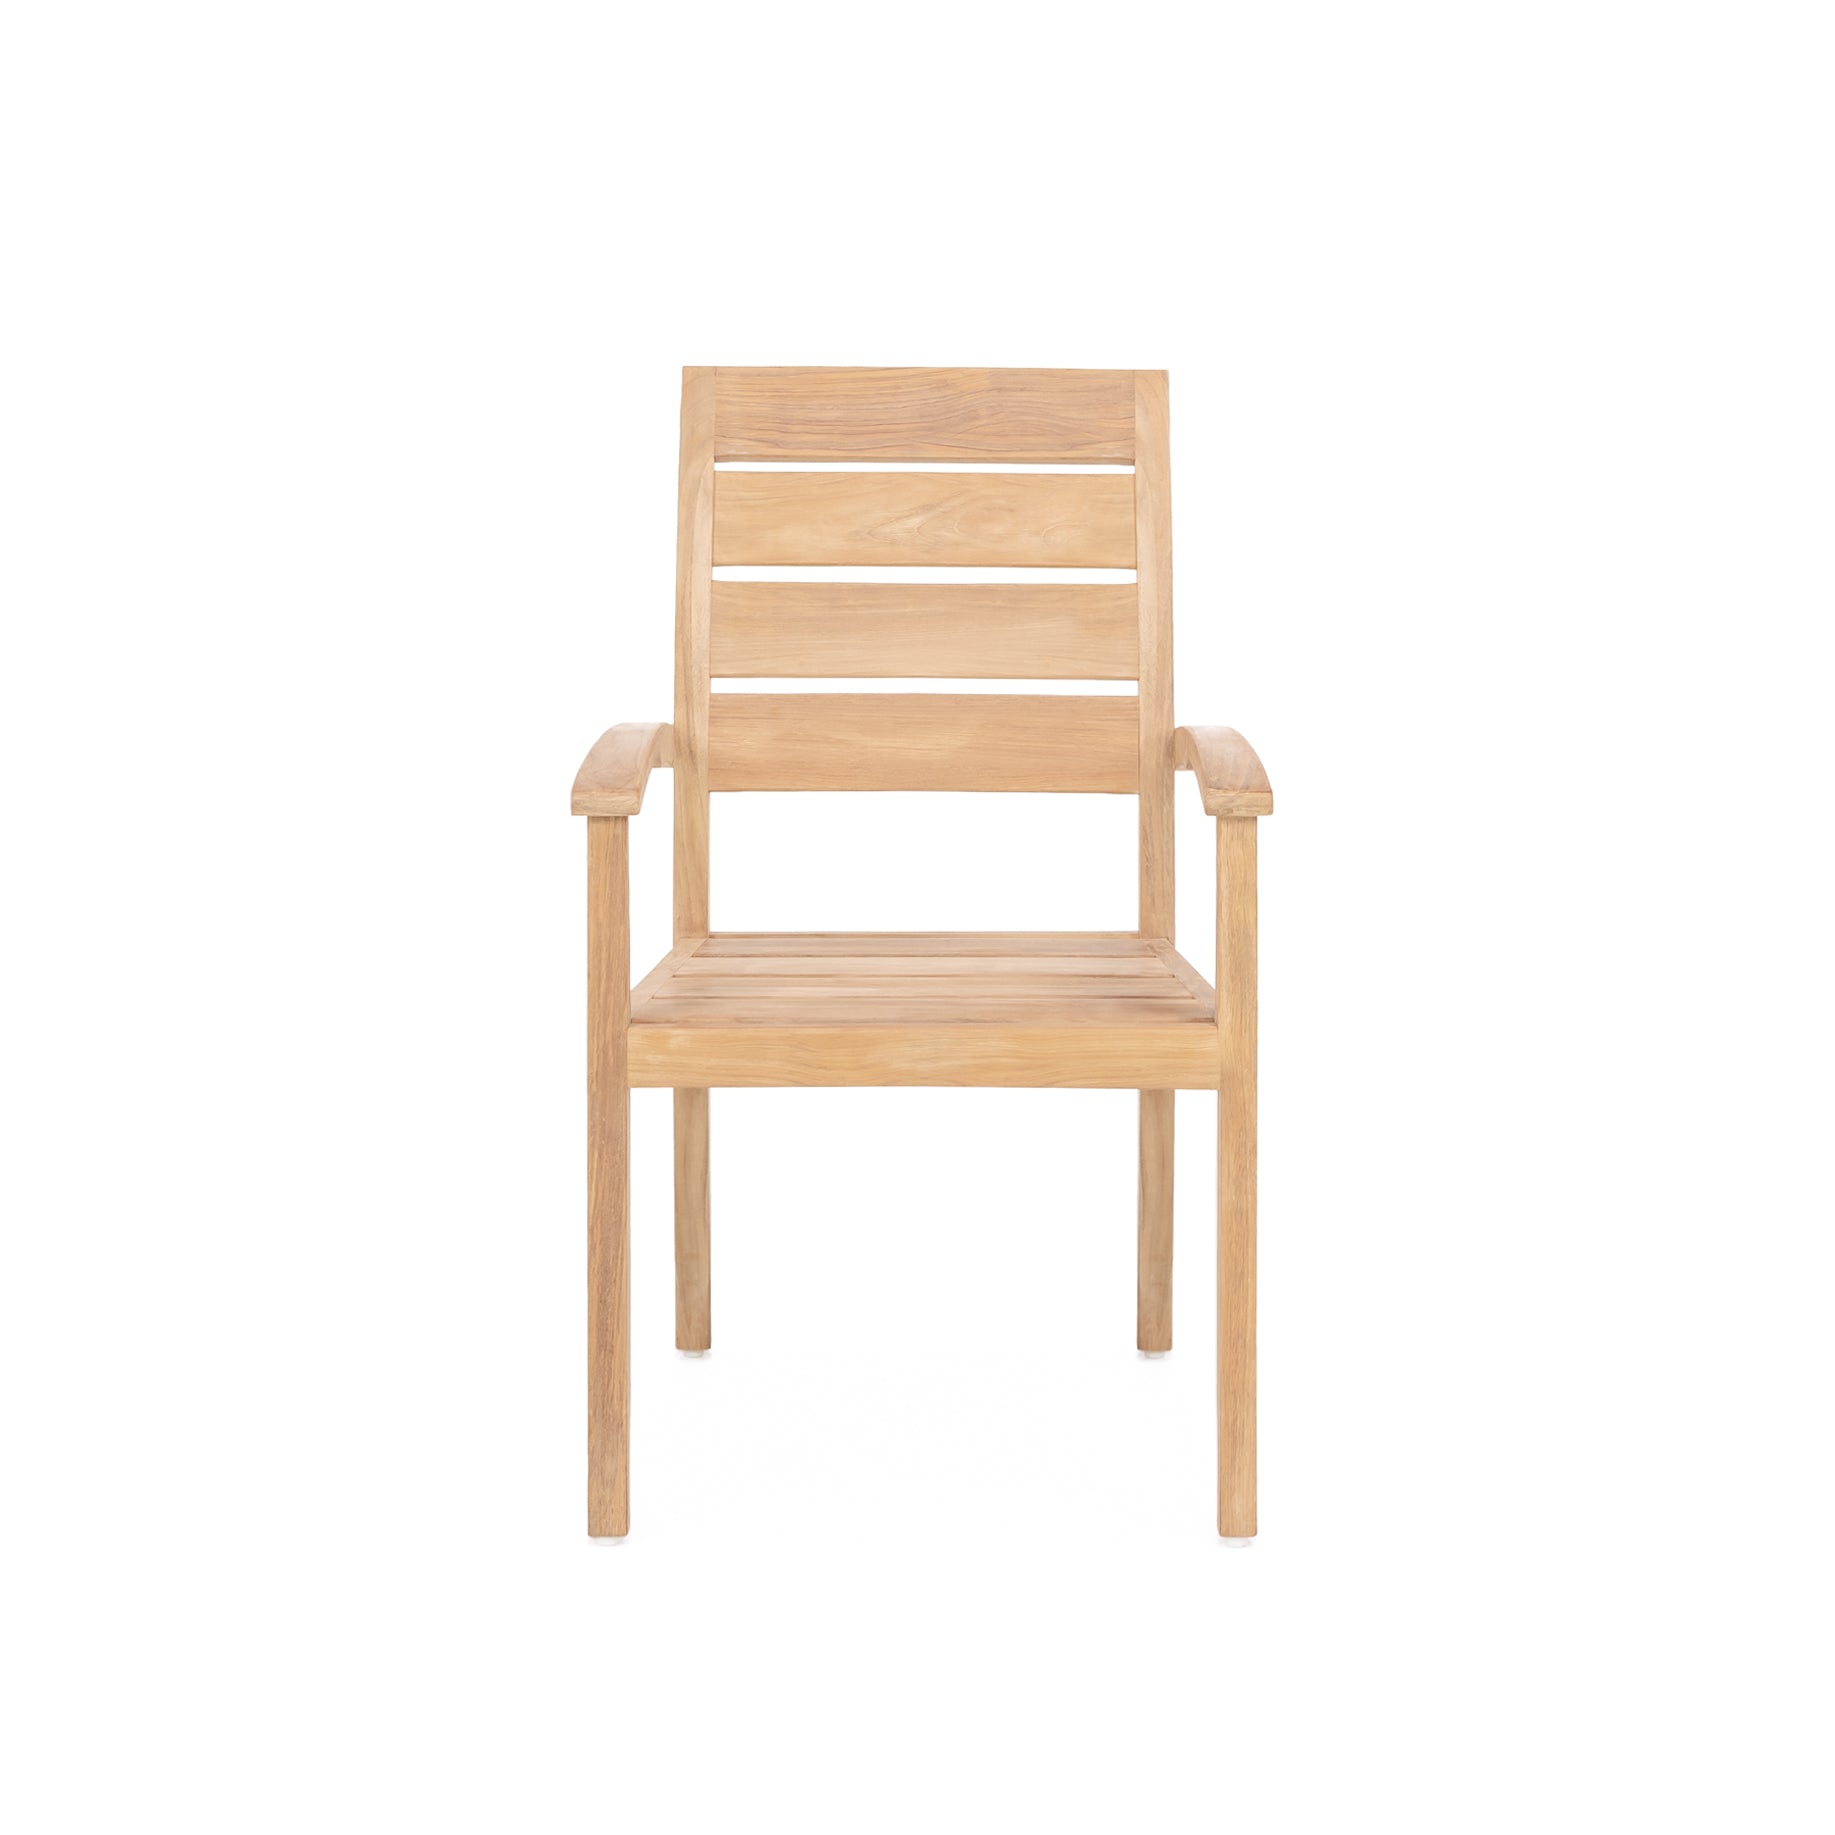 Chair Outdoor + - Teak Friday Outdoor Teak Table – Arm - Patio Collection Chairs